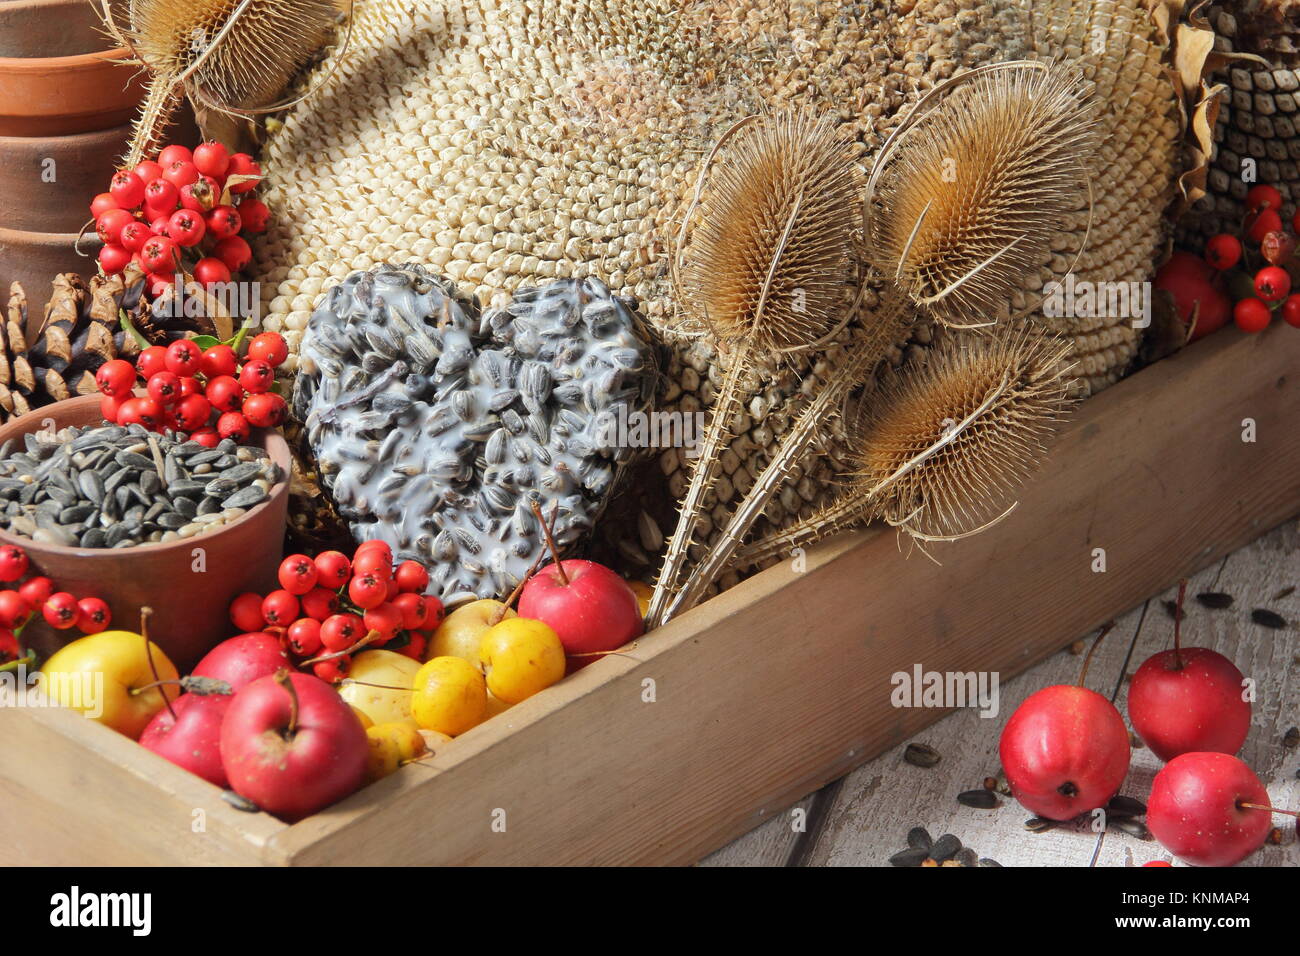 Bird food buffet ingredients including crab apples, sunflowers seeds, teasel seed heads, pyracantha berries and a suet cake, gathered in a wooden tray Stock Photo